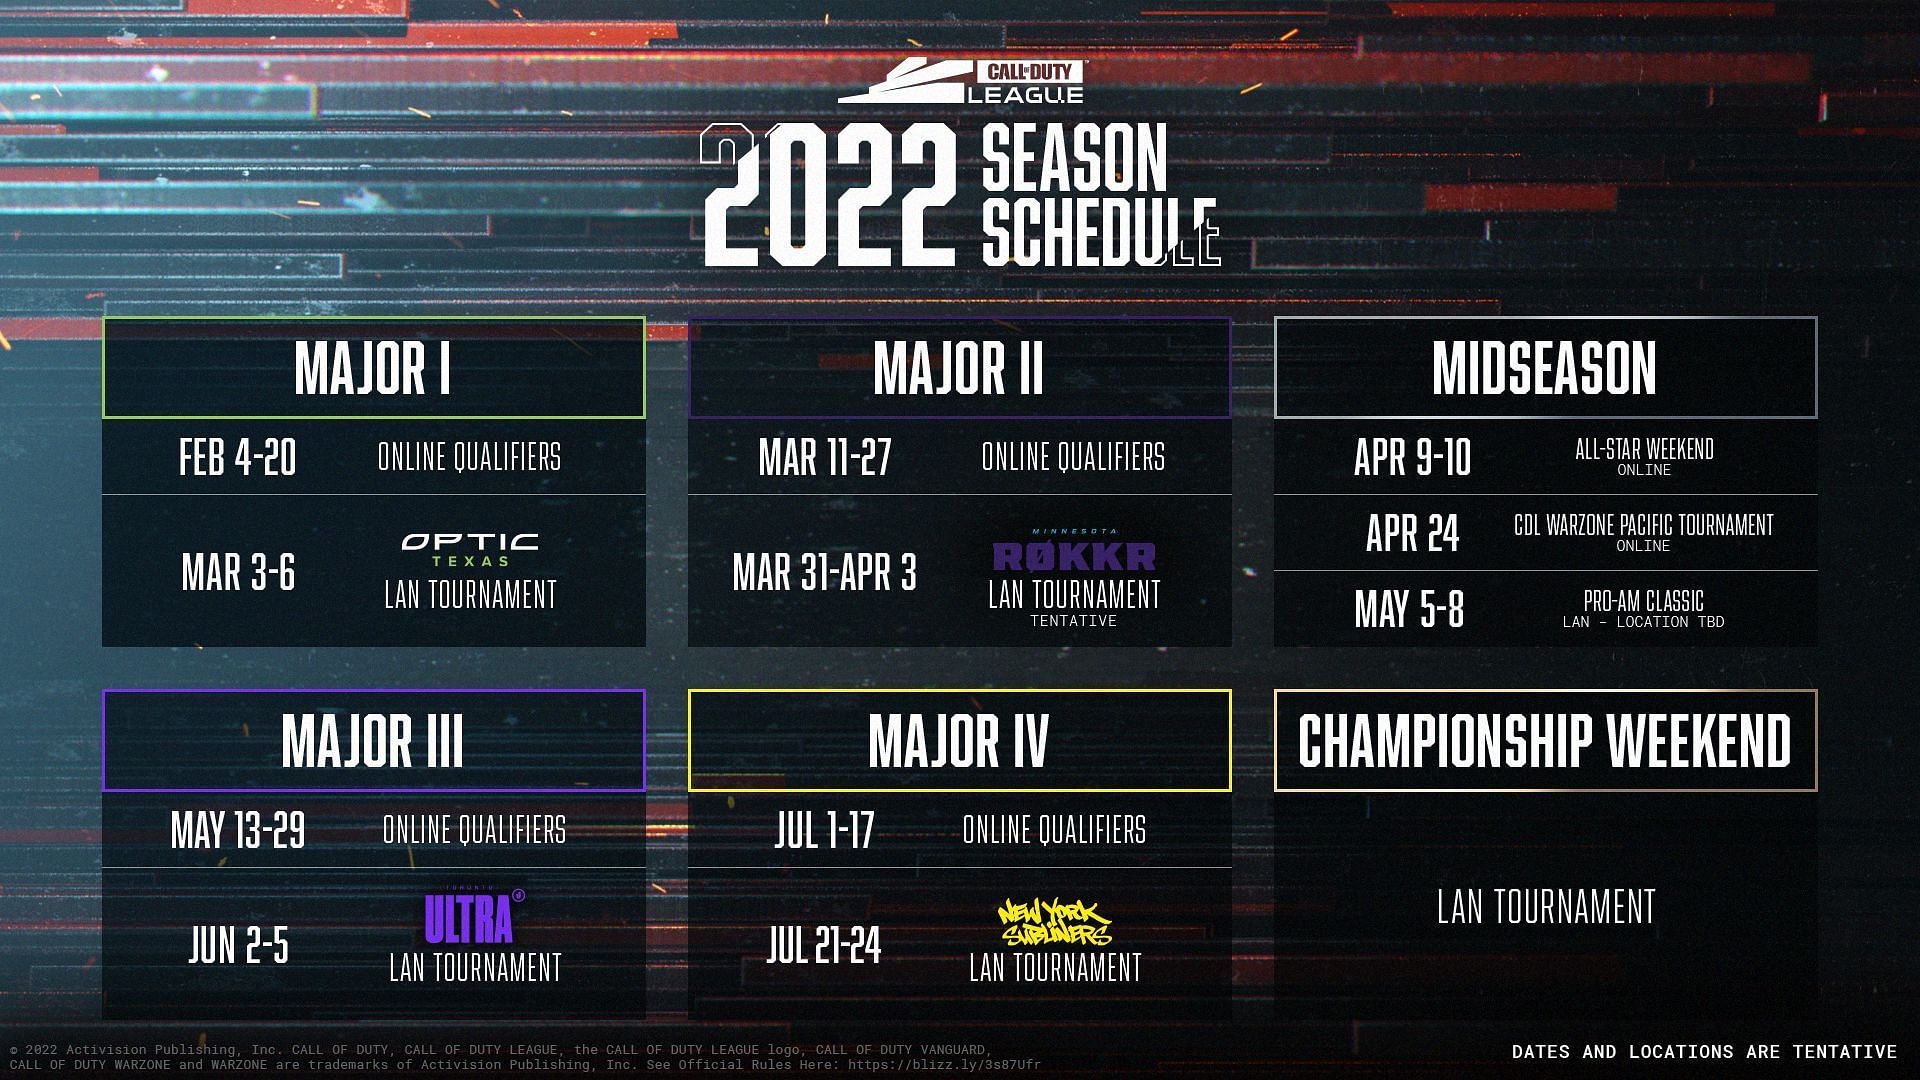 The full schedule for the season is here. (Image via Call of Duty League)